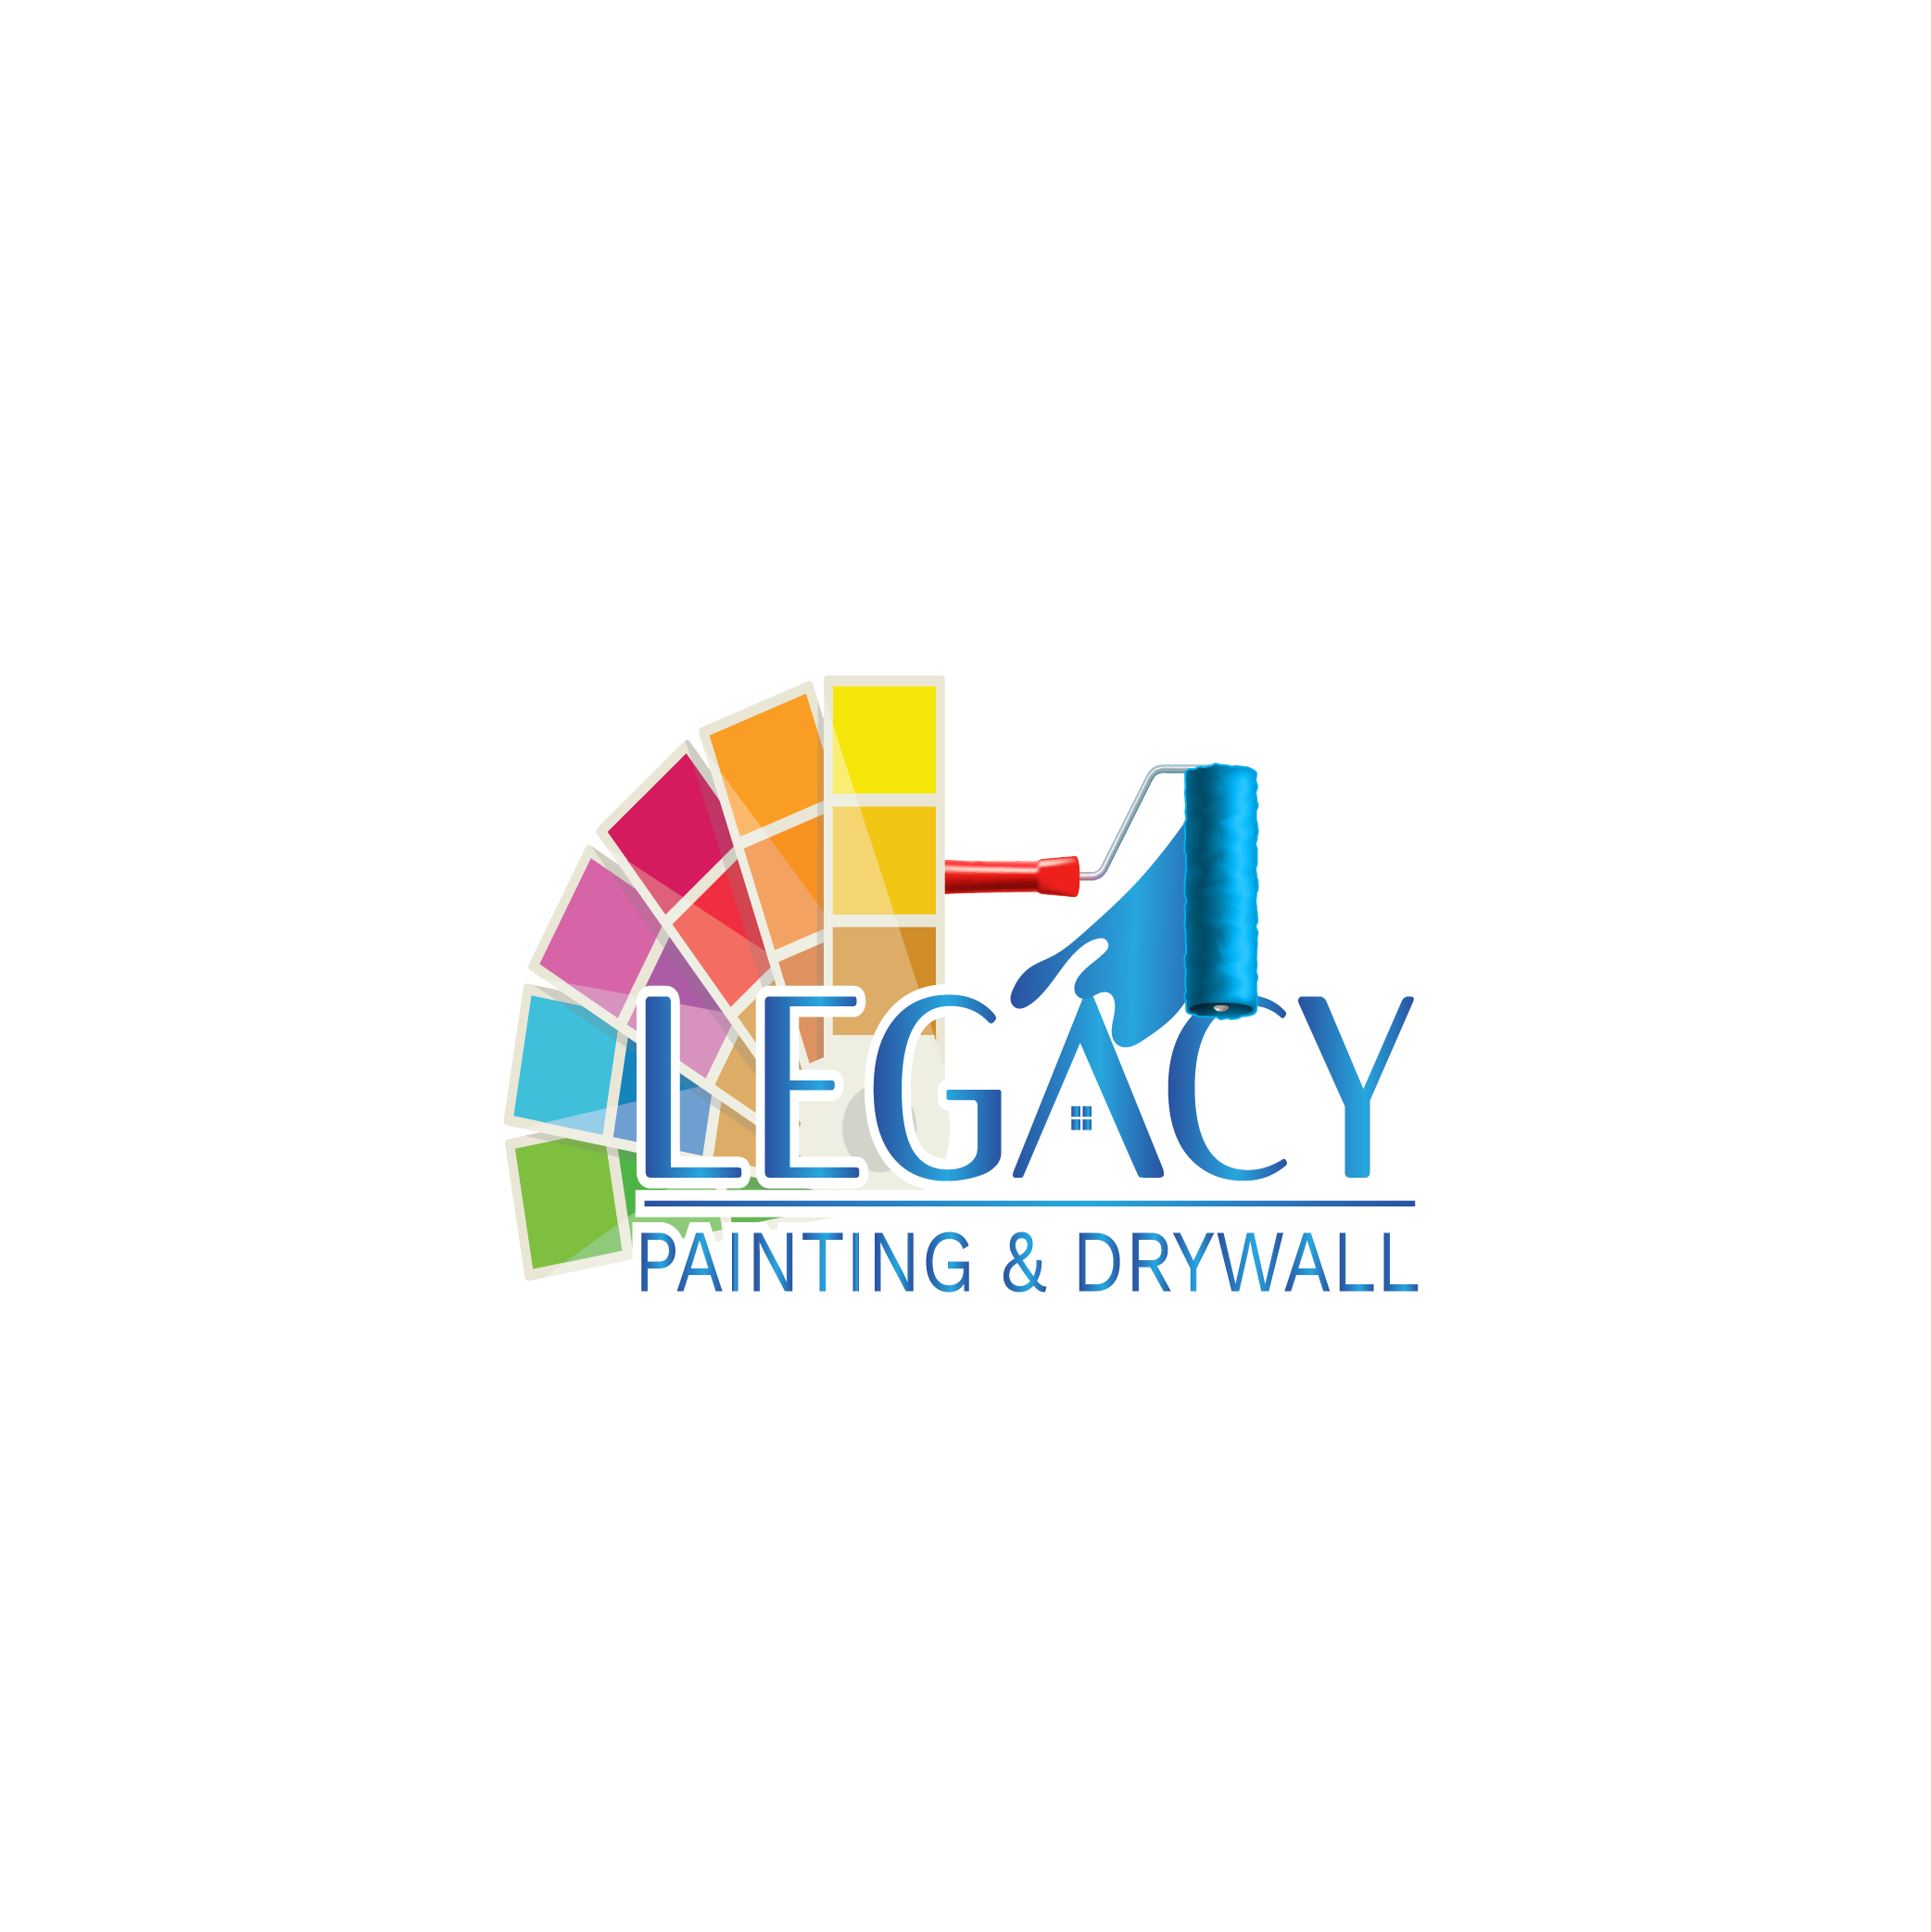 Legacy Painting & Drywall Highlights The Reasons To Hire A Professional Painter